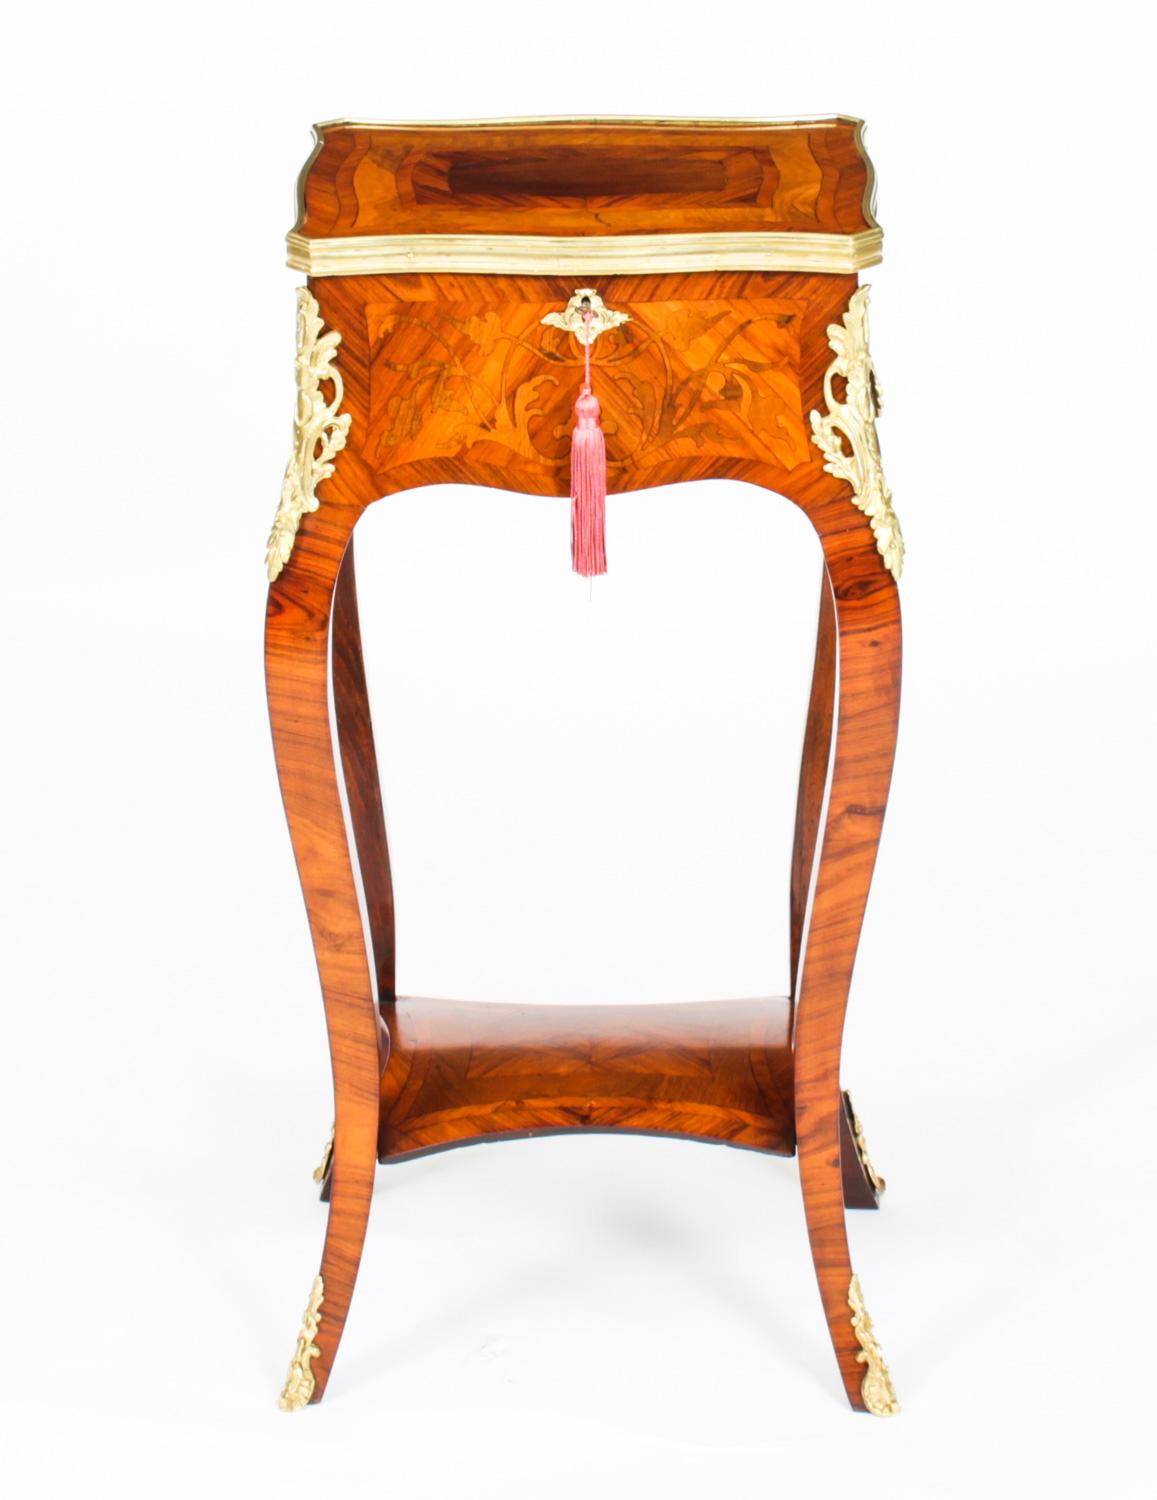 This is a beautiful antique French Louis Revival parquetry and marquetry ormolu mounted serpentine side table / teapoy kettle stand, circa 1850 in date.

The ormolu banded top has a Horne's patent hinge with beautiful banded parquetry enclosing a